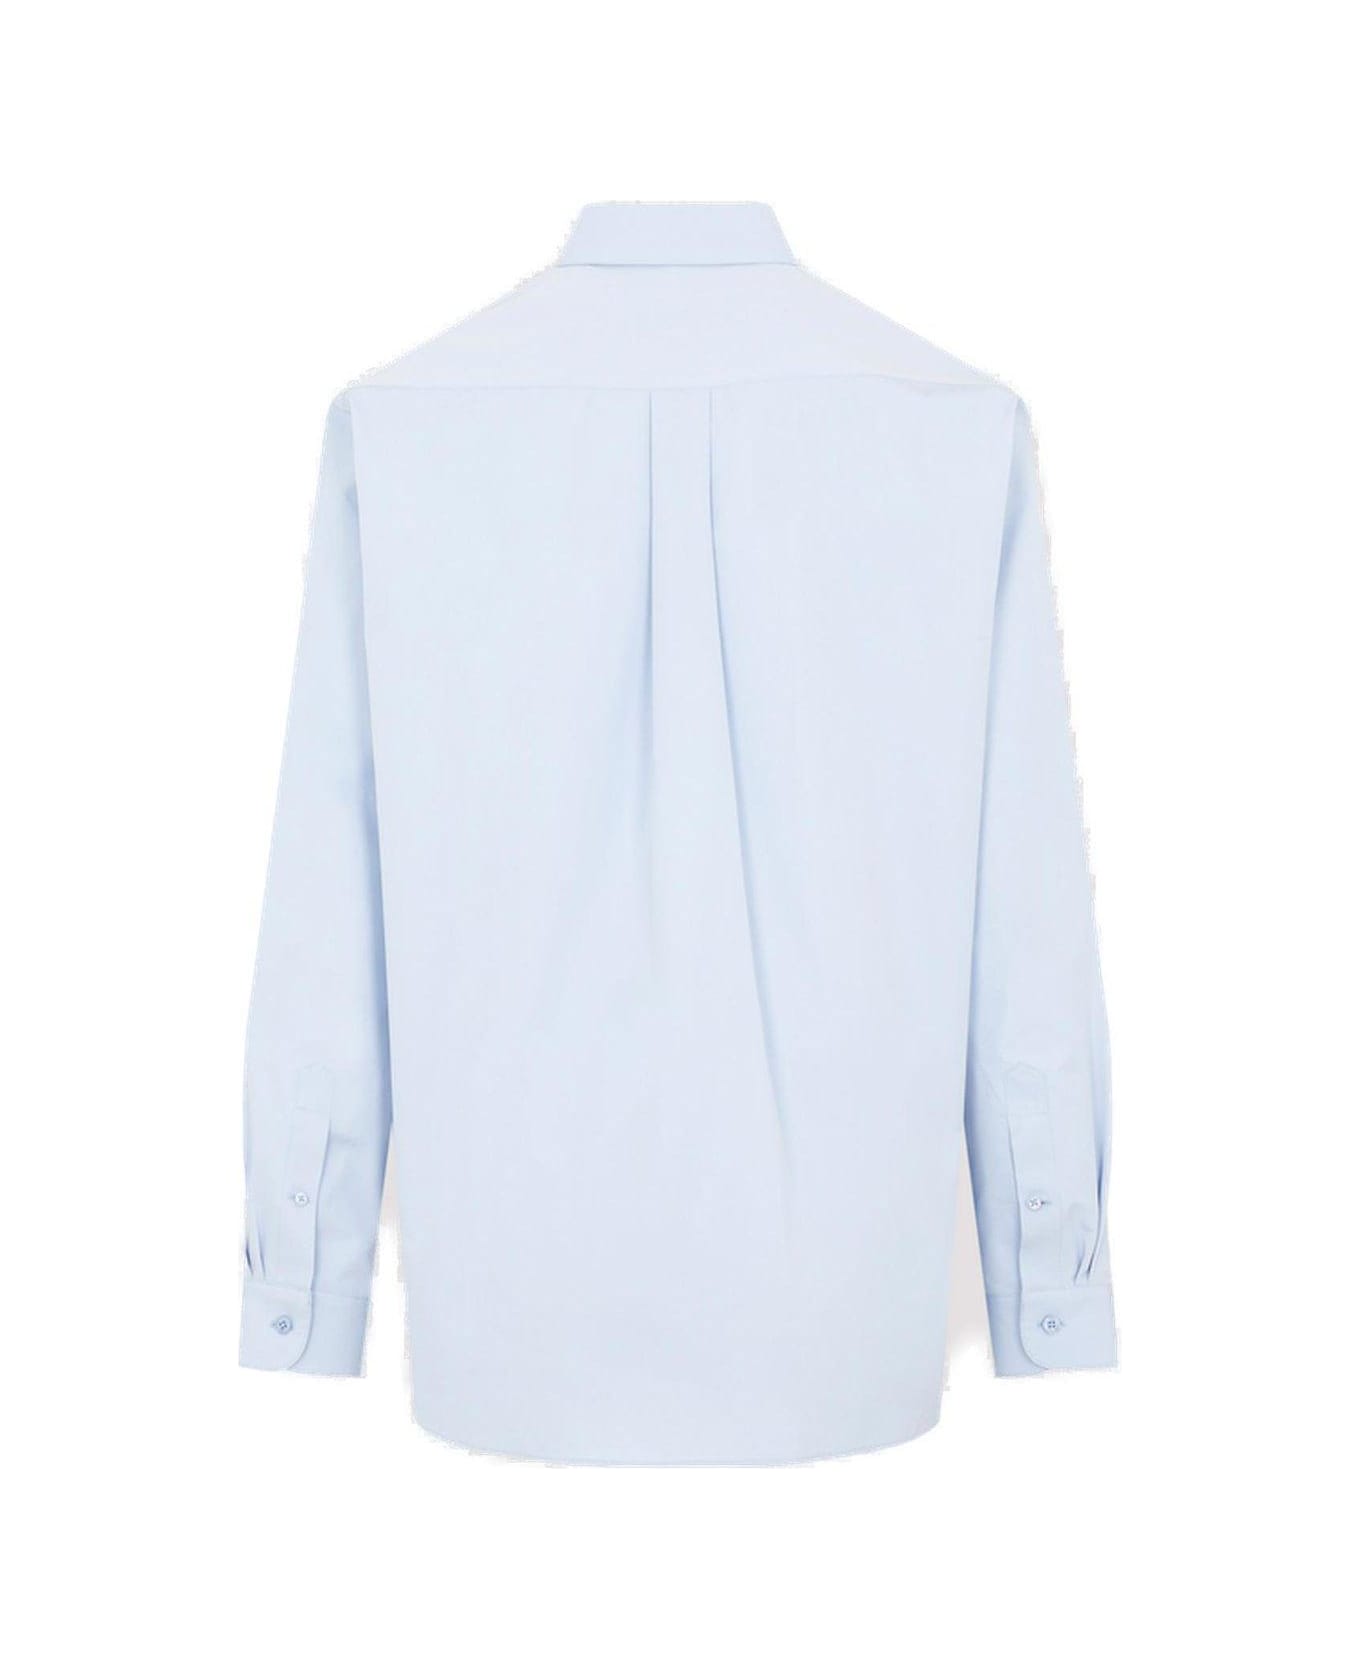 Martine Rose Buttoned Long-sleeved Shirt - Blue シャツ